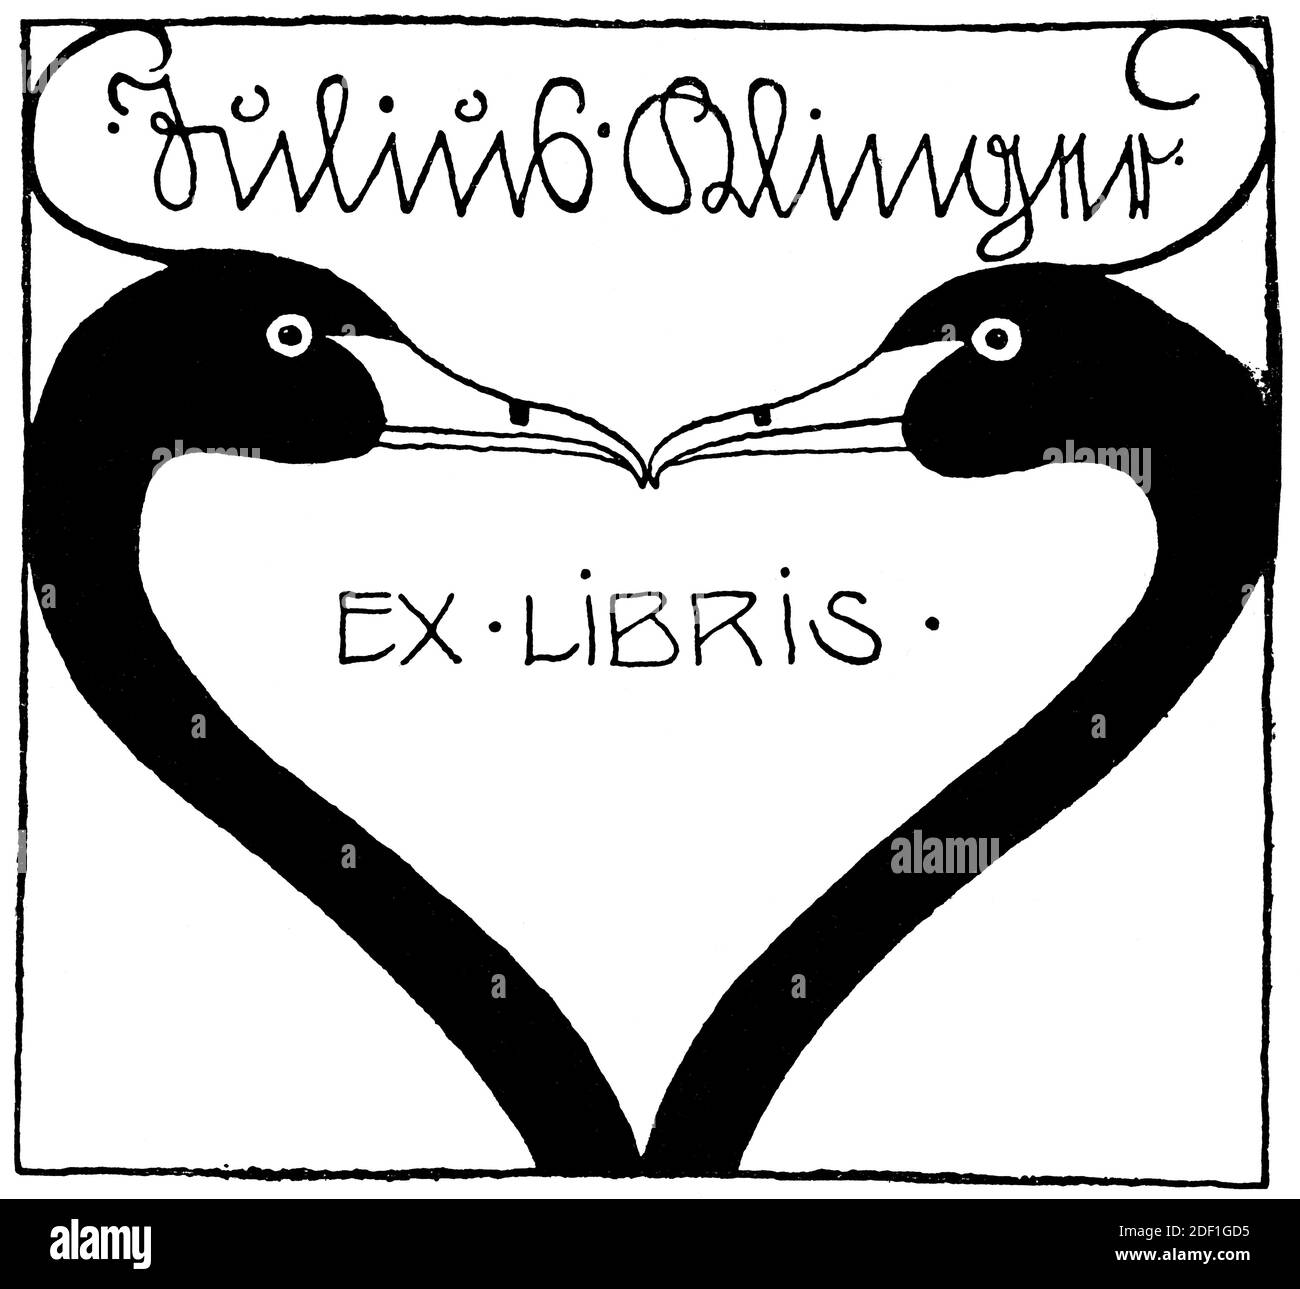 Ex Libris in the shape of a heart made from the heads and neck of a swan. Illustration of the 19th century. Germany. White background. Stock Photo